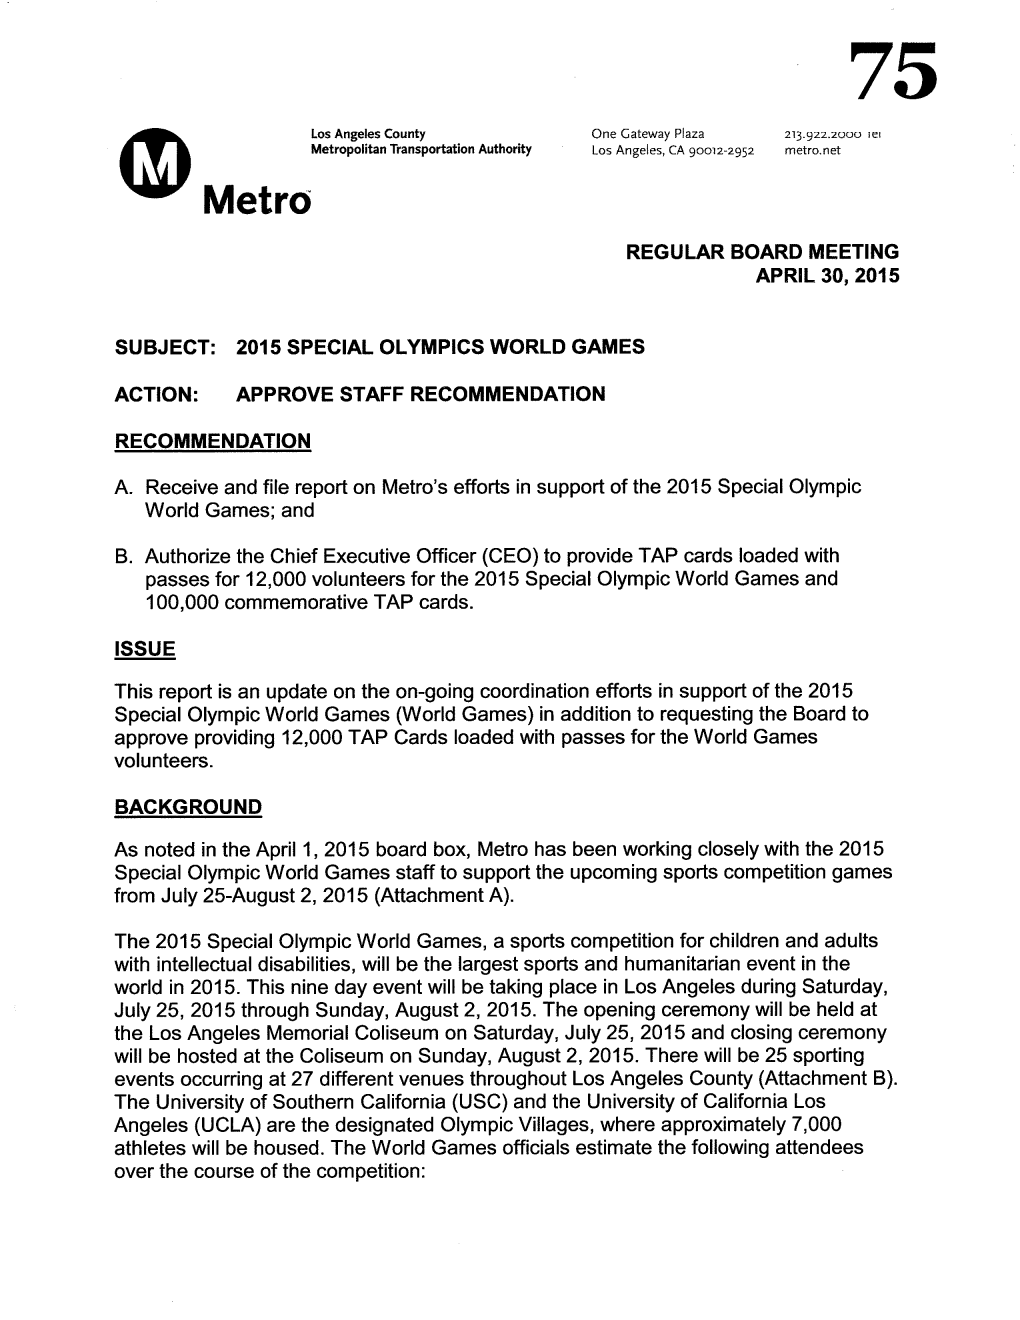 Regular Board Meeting April 30, 2015 Subject: 2015 Special Olympics World Games Action: Approve Staff Recommendation Recommendat